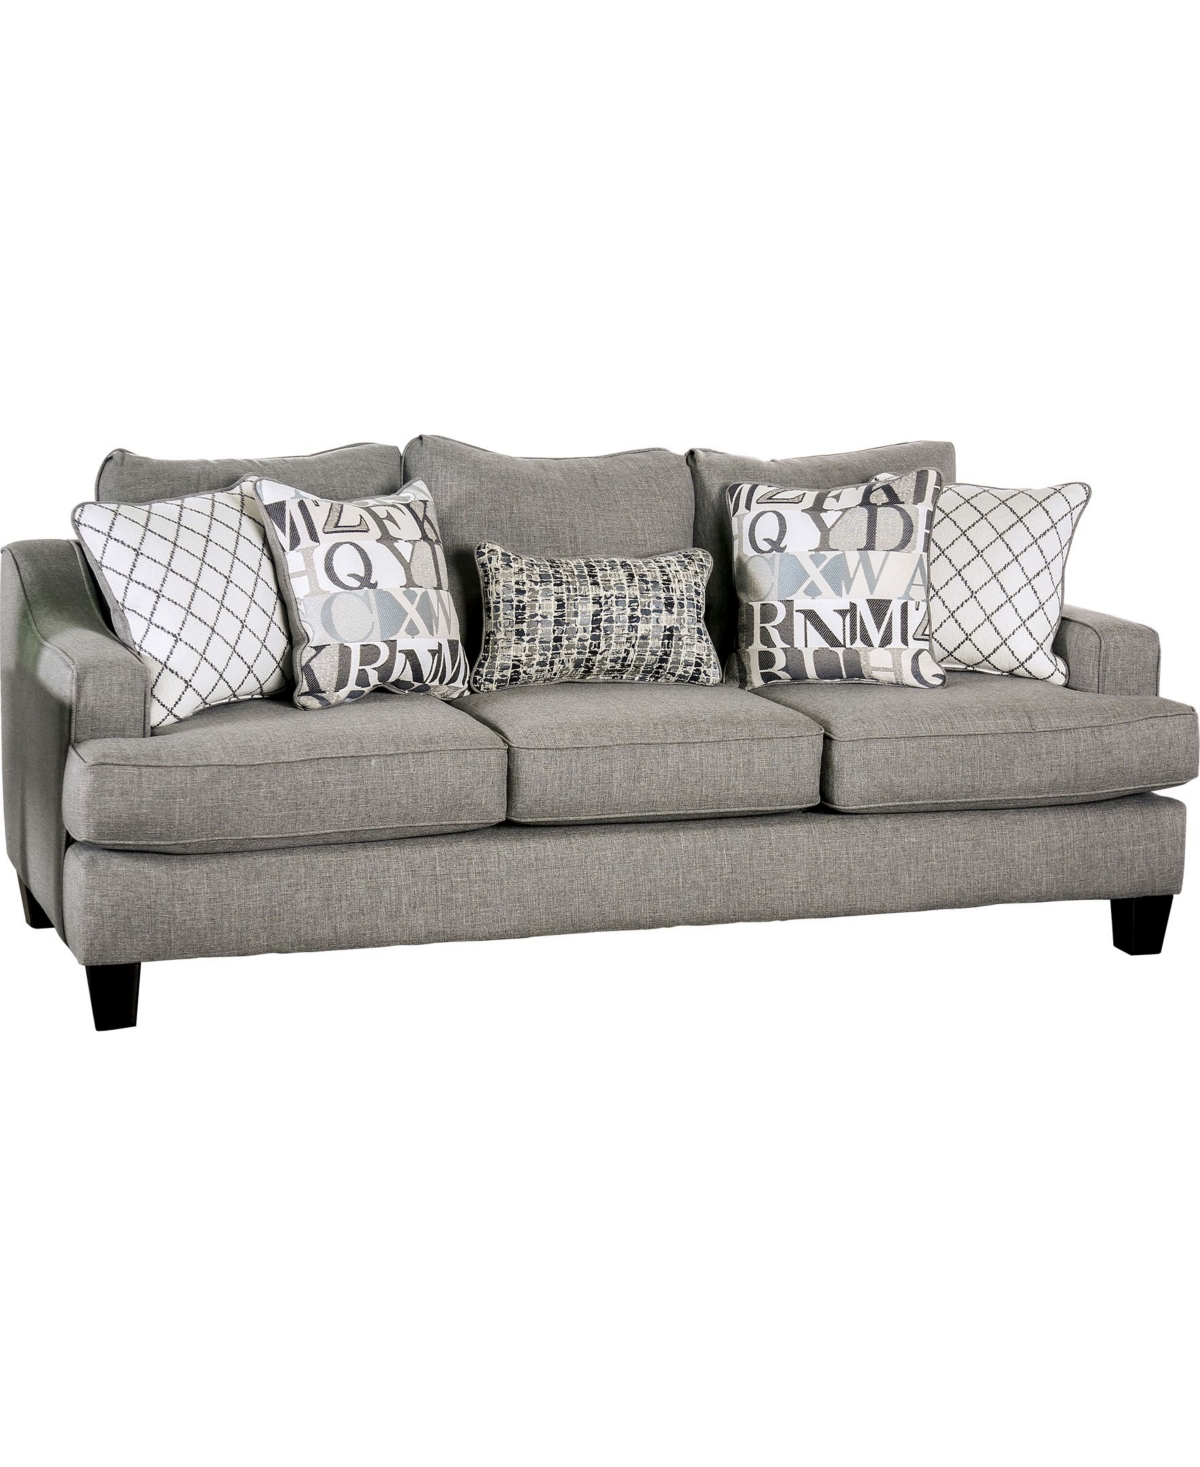 of America Canzey Upholstered Sofa